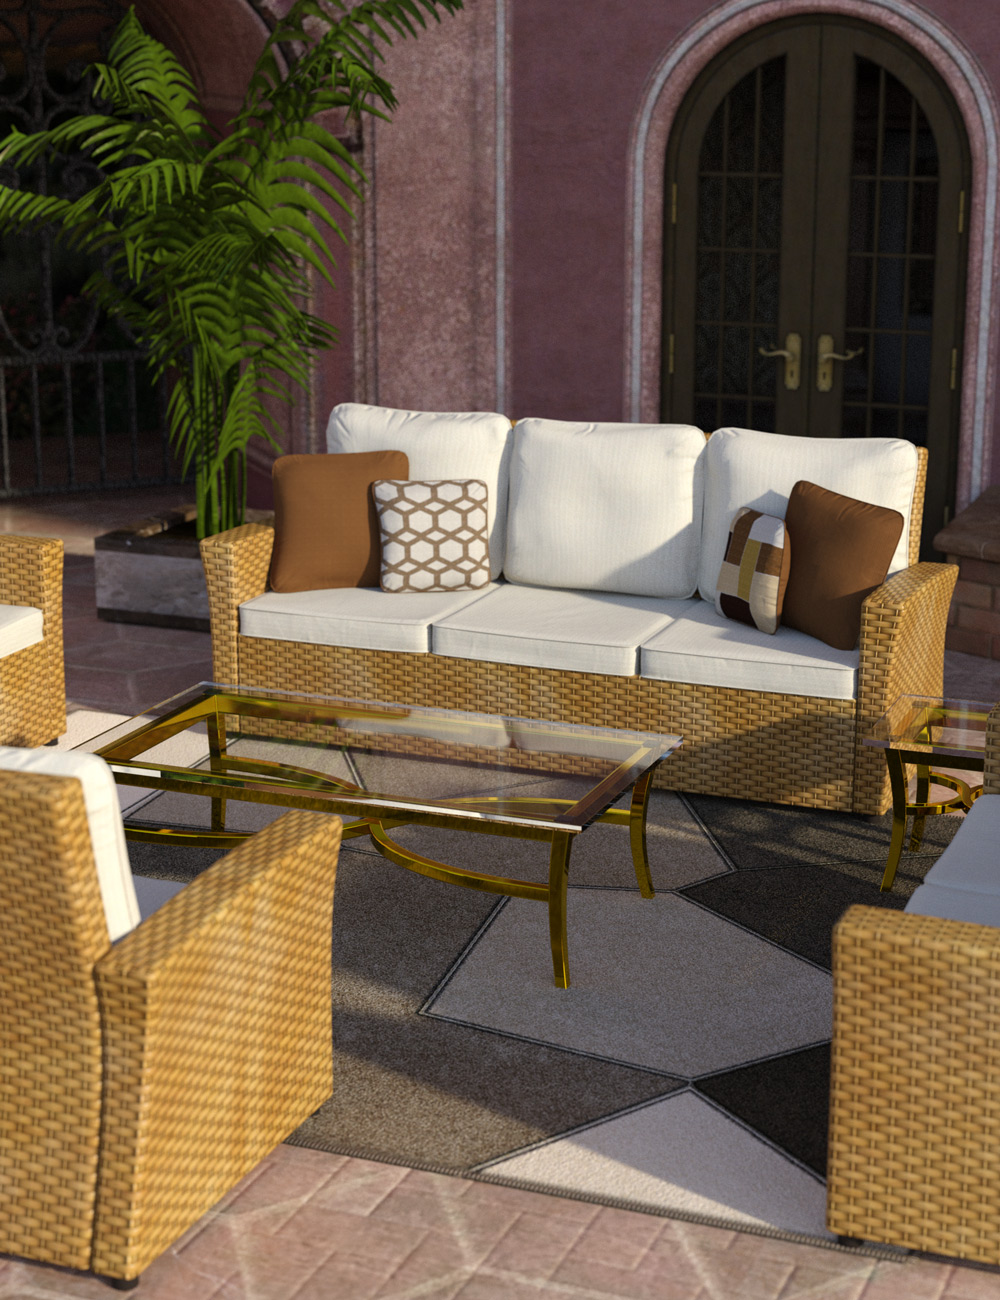 Wicker Furniture by: Age of Armour, 3D Models by Daz 3D